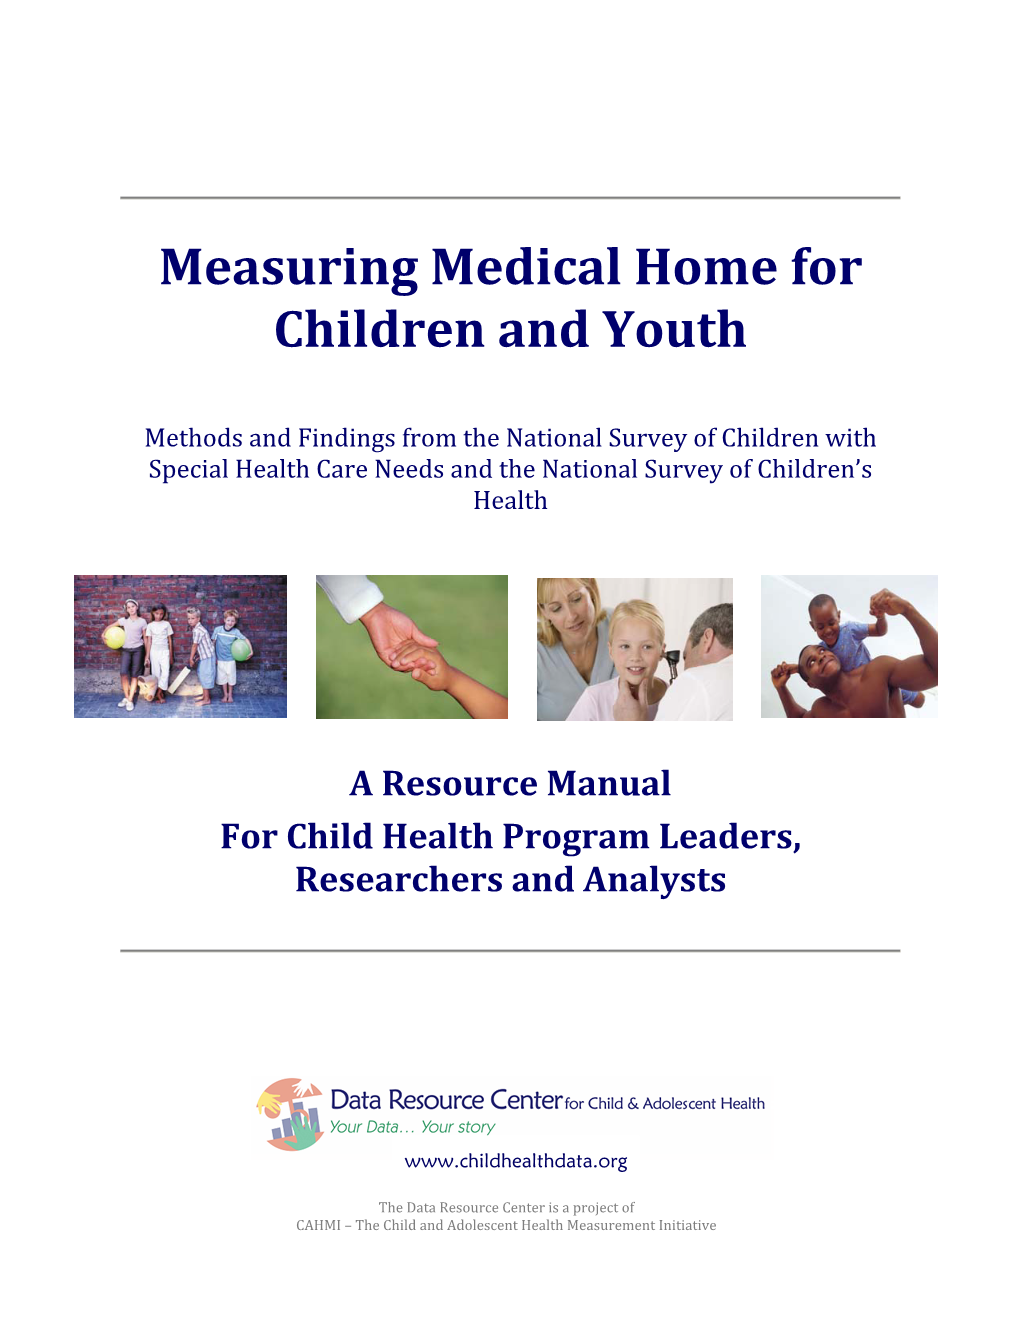 Measuring Medical Home for Children and Youth